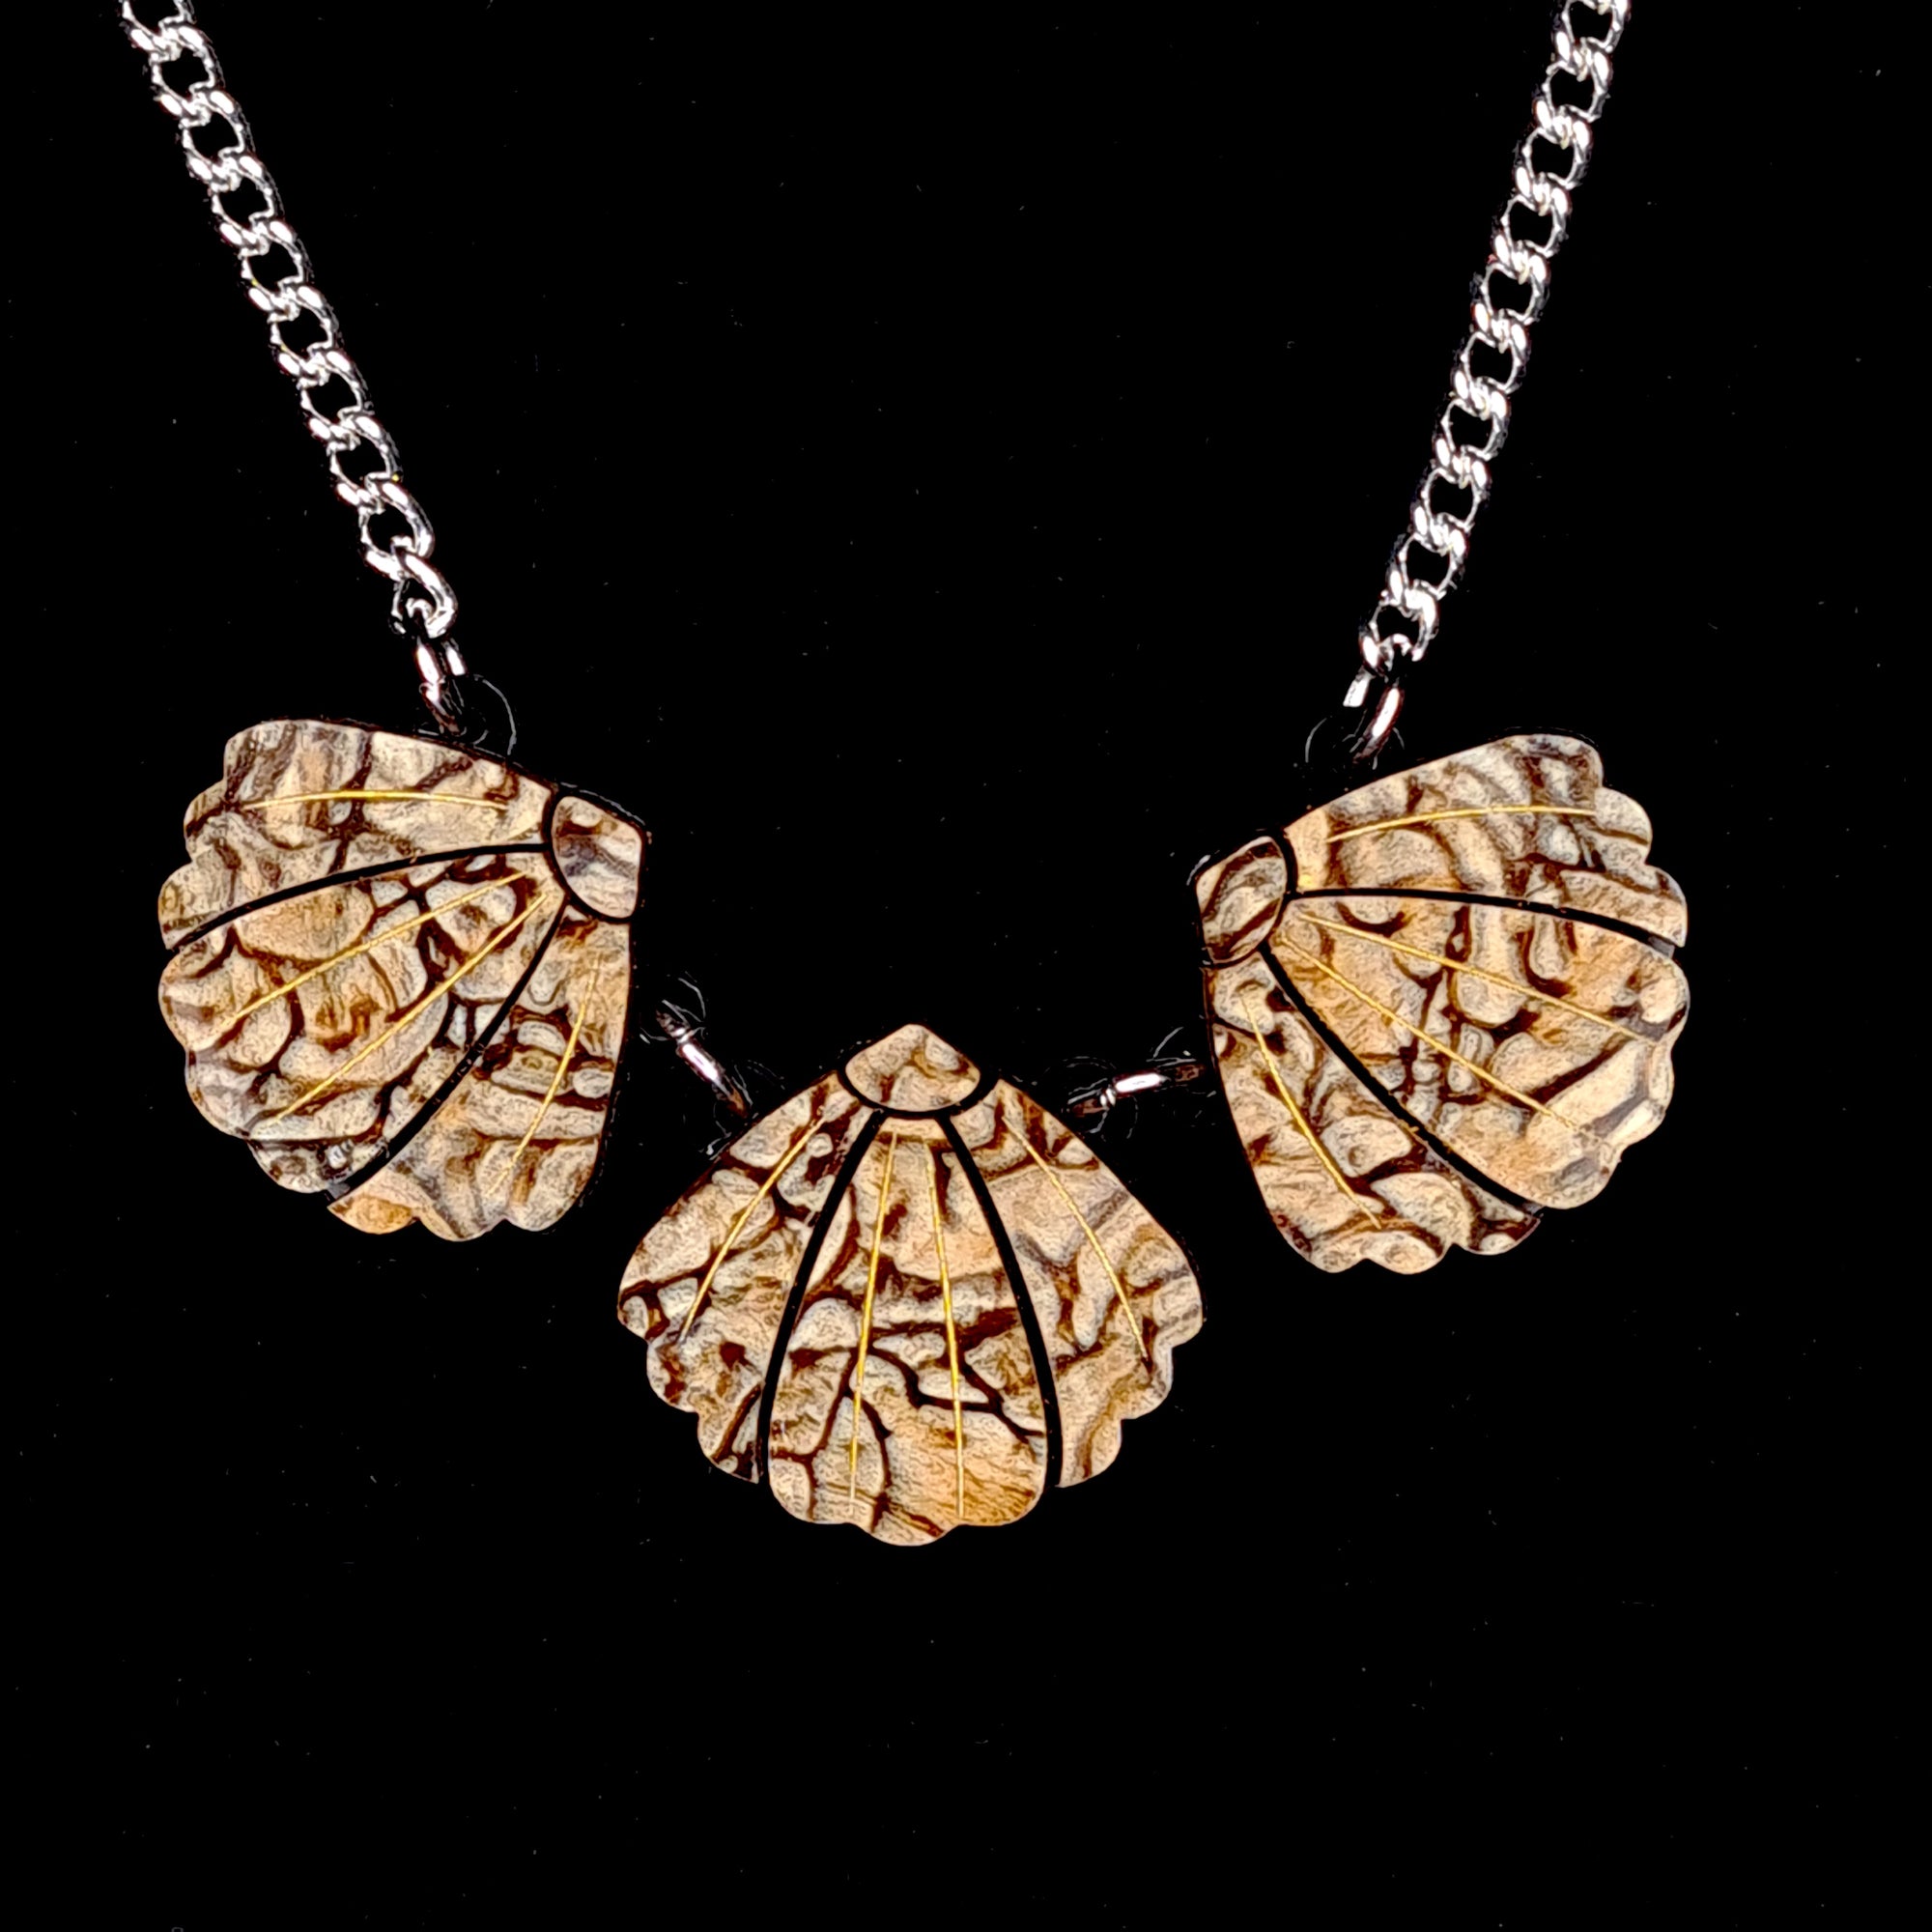 Triple Shell Necklace (Brown) by Lou Taylor